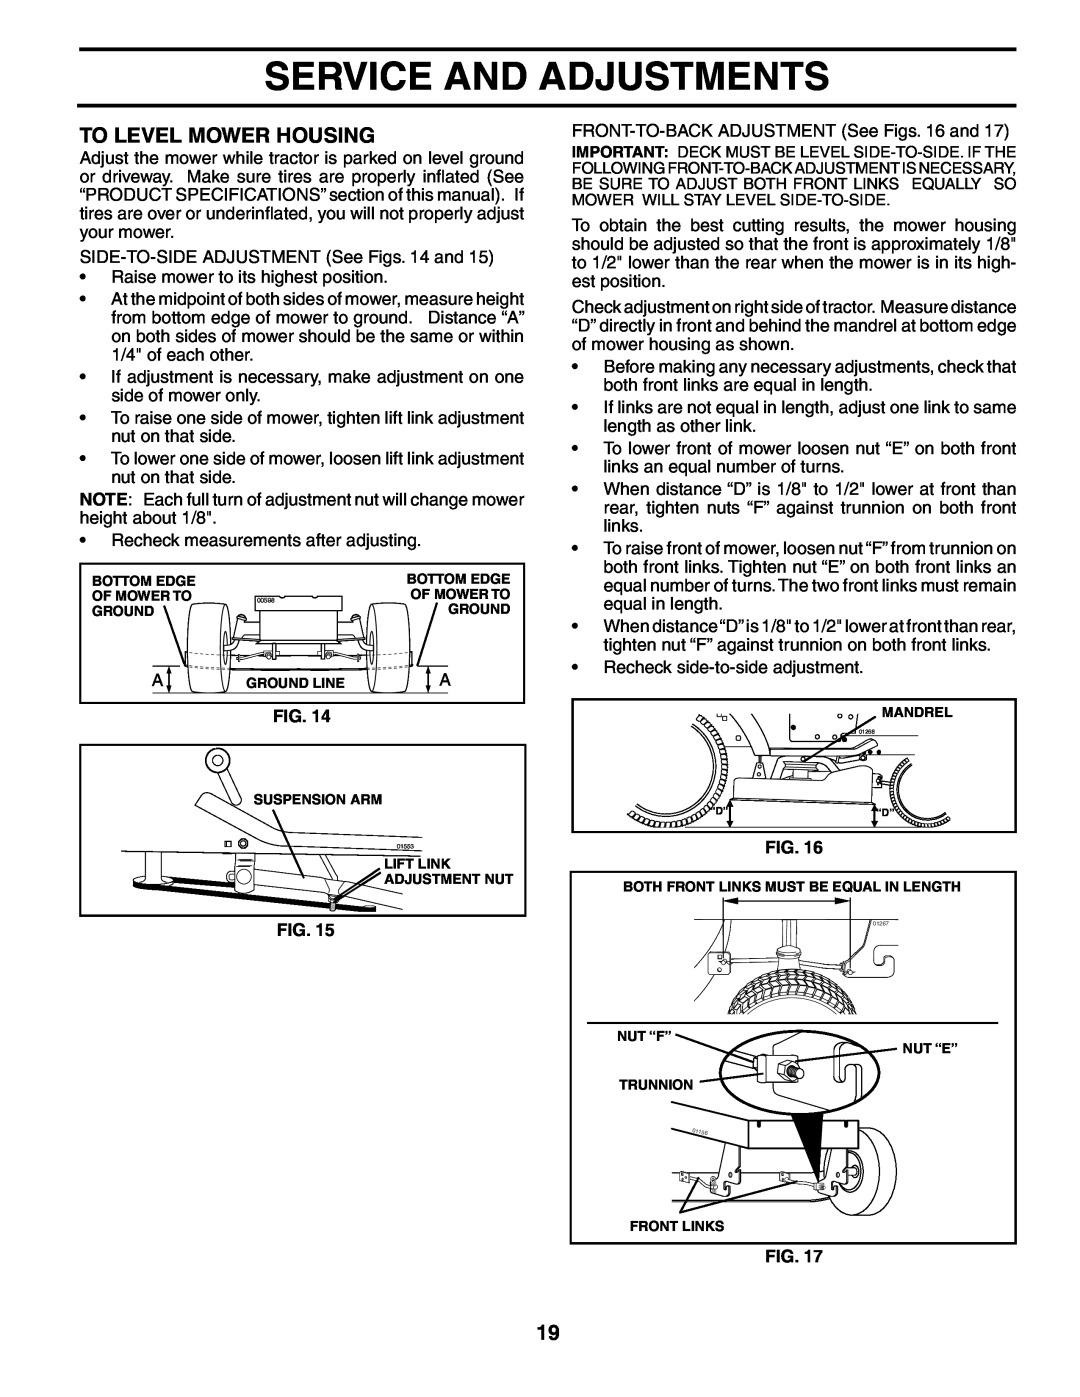 Poulan 192087 manual To Level Mower Housing, Service And Adjustments 